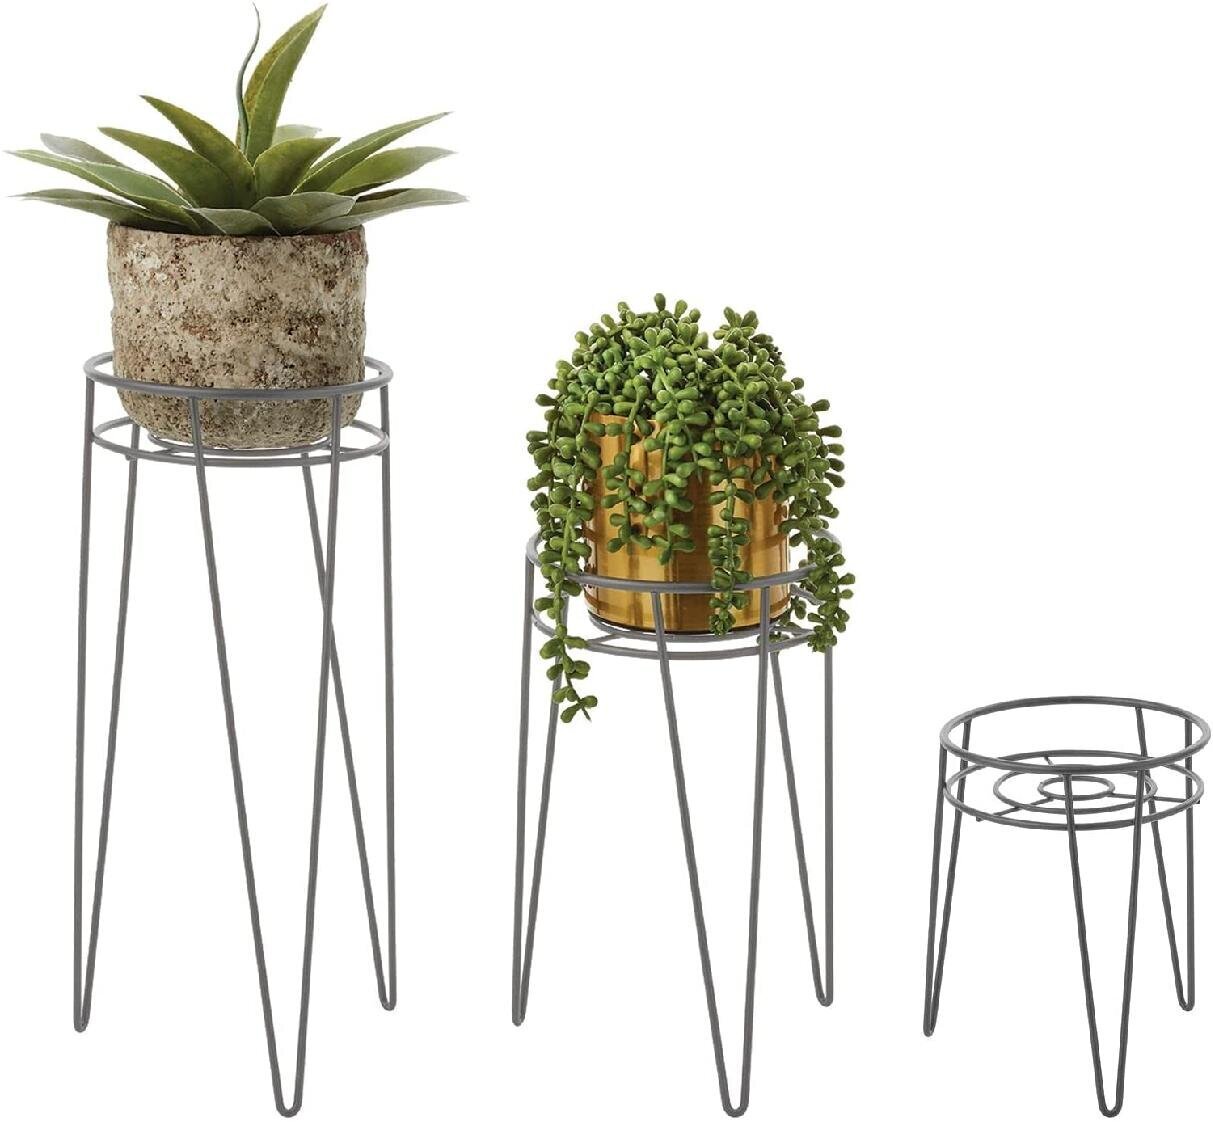 A Trio of Plant Stands